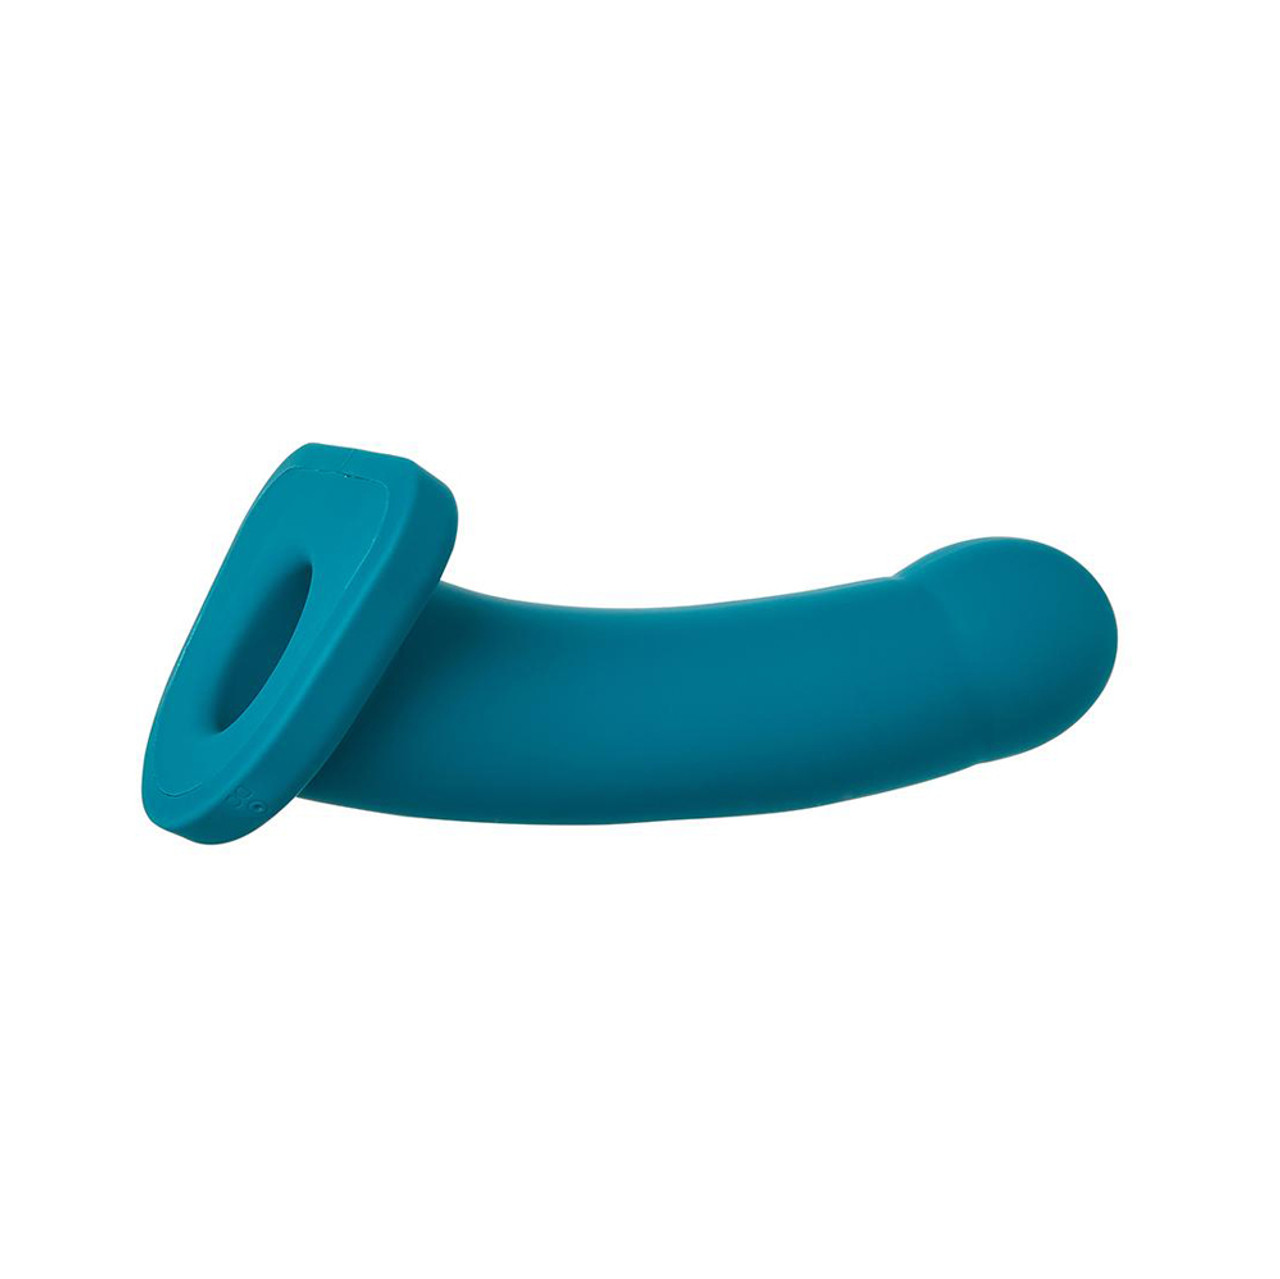 Buy the Nexus Collection Lennox 8 inch Hollow Sheath g-spot p-spot Curved Vibrating Silicone picture pic